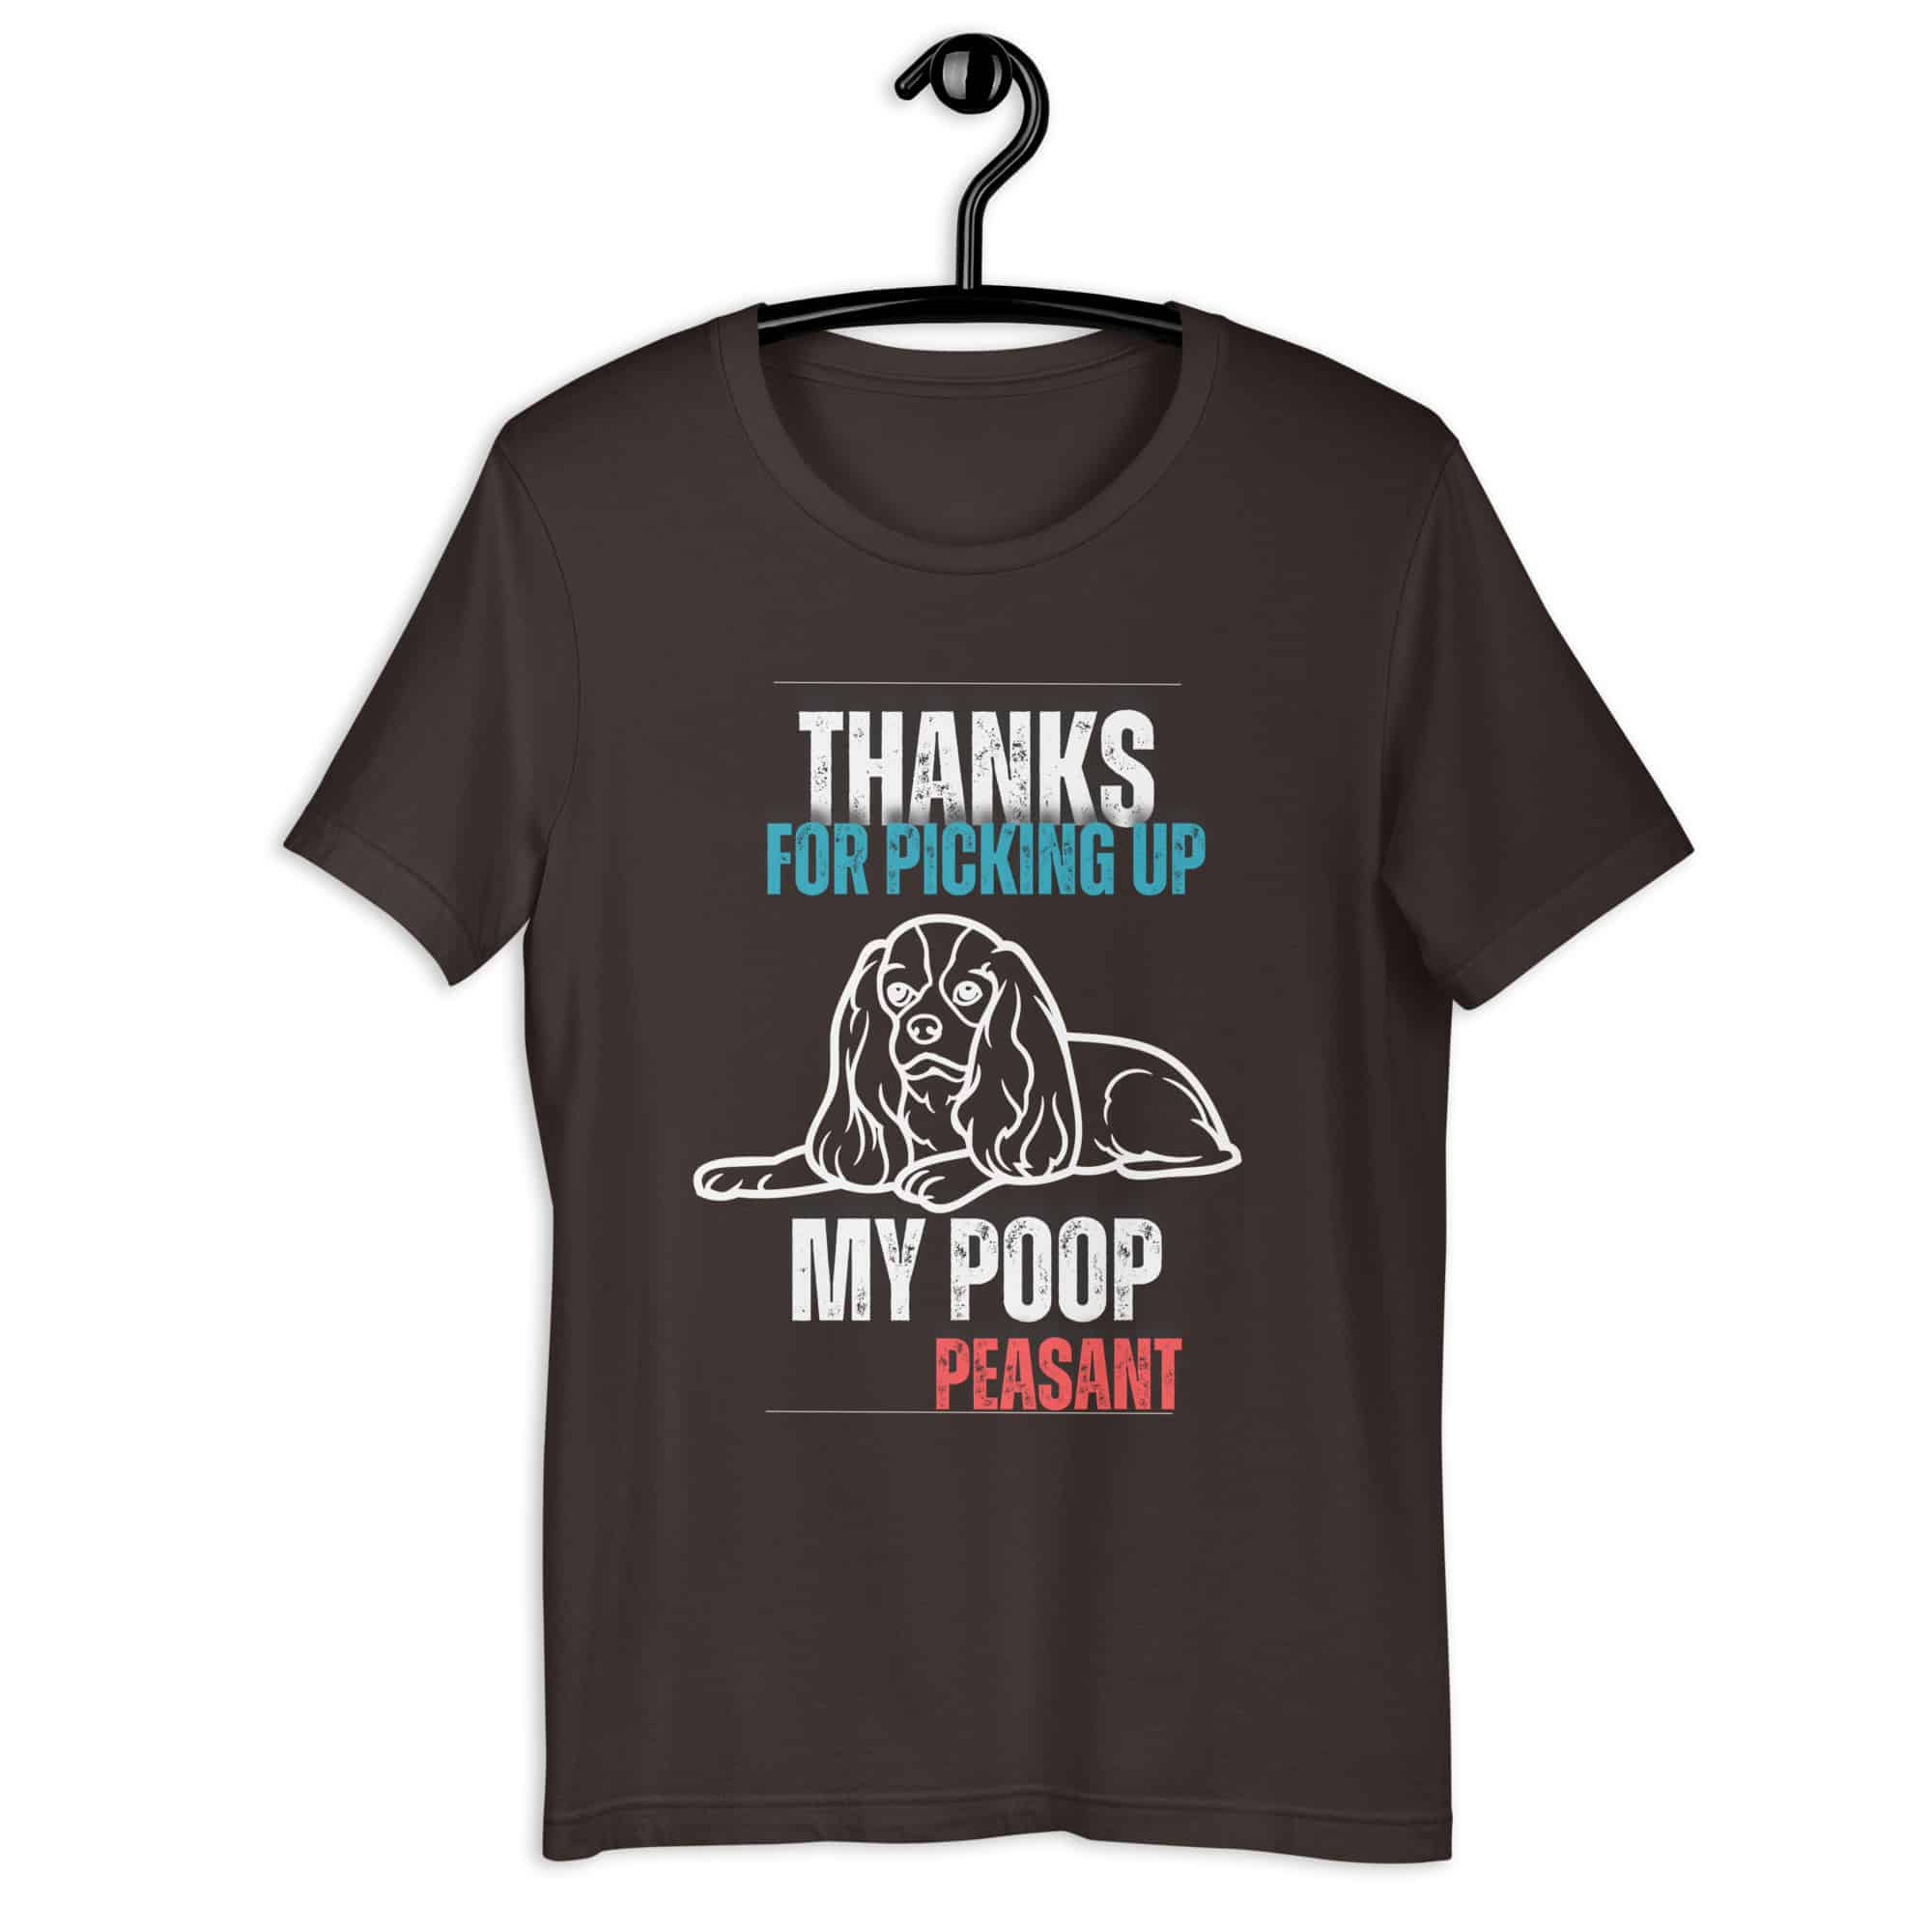 Thanks For Picking Up My POOP Funny Hounds Unisex T-Shirt. Brown